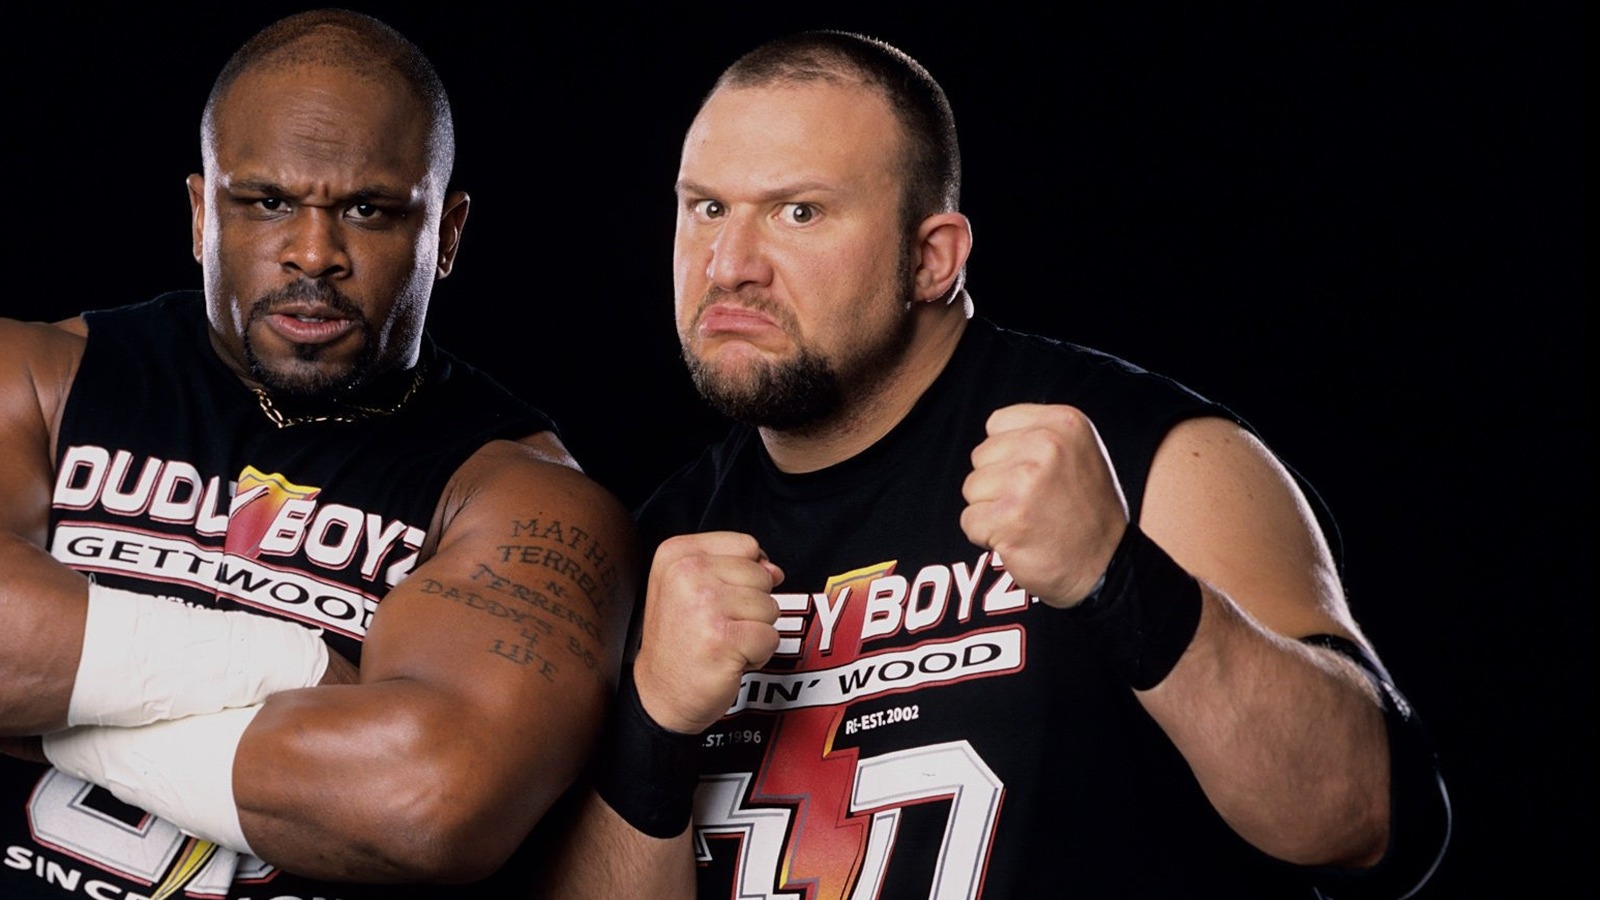 WWE HOFer Bully Ray On Importance Of Wrestlers Not Going Behind Each Other's Backs